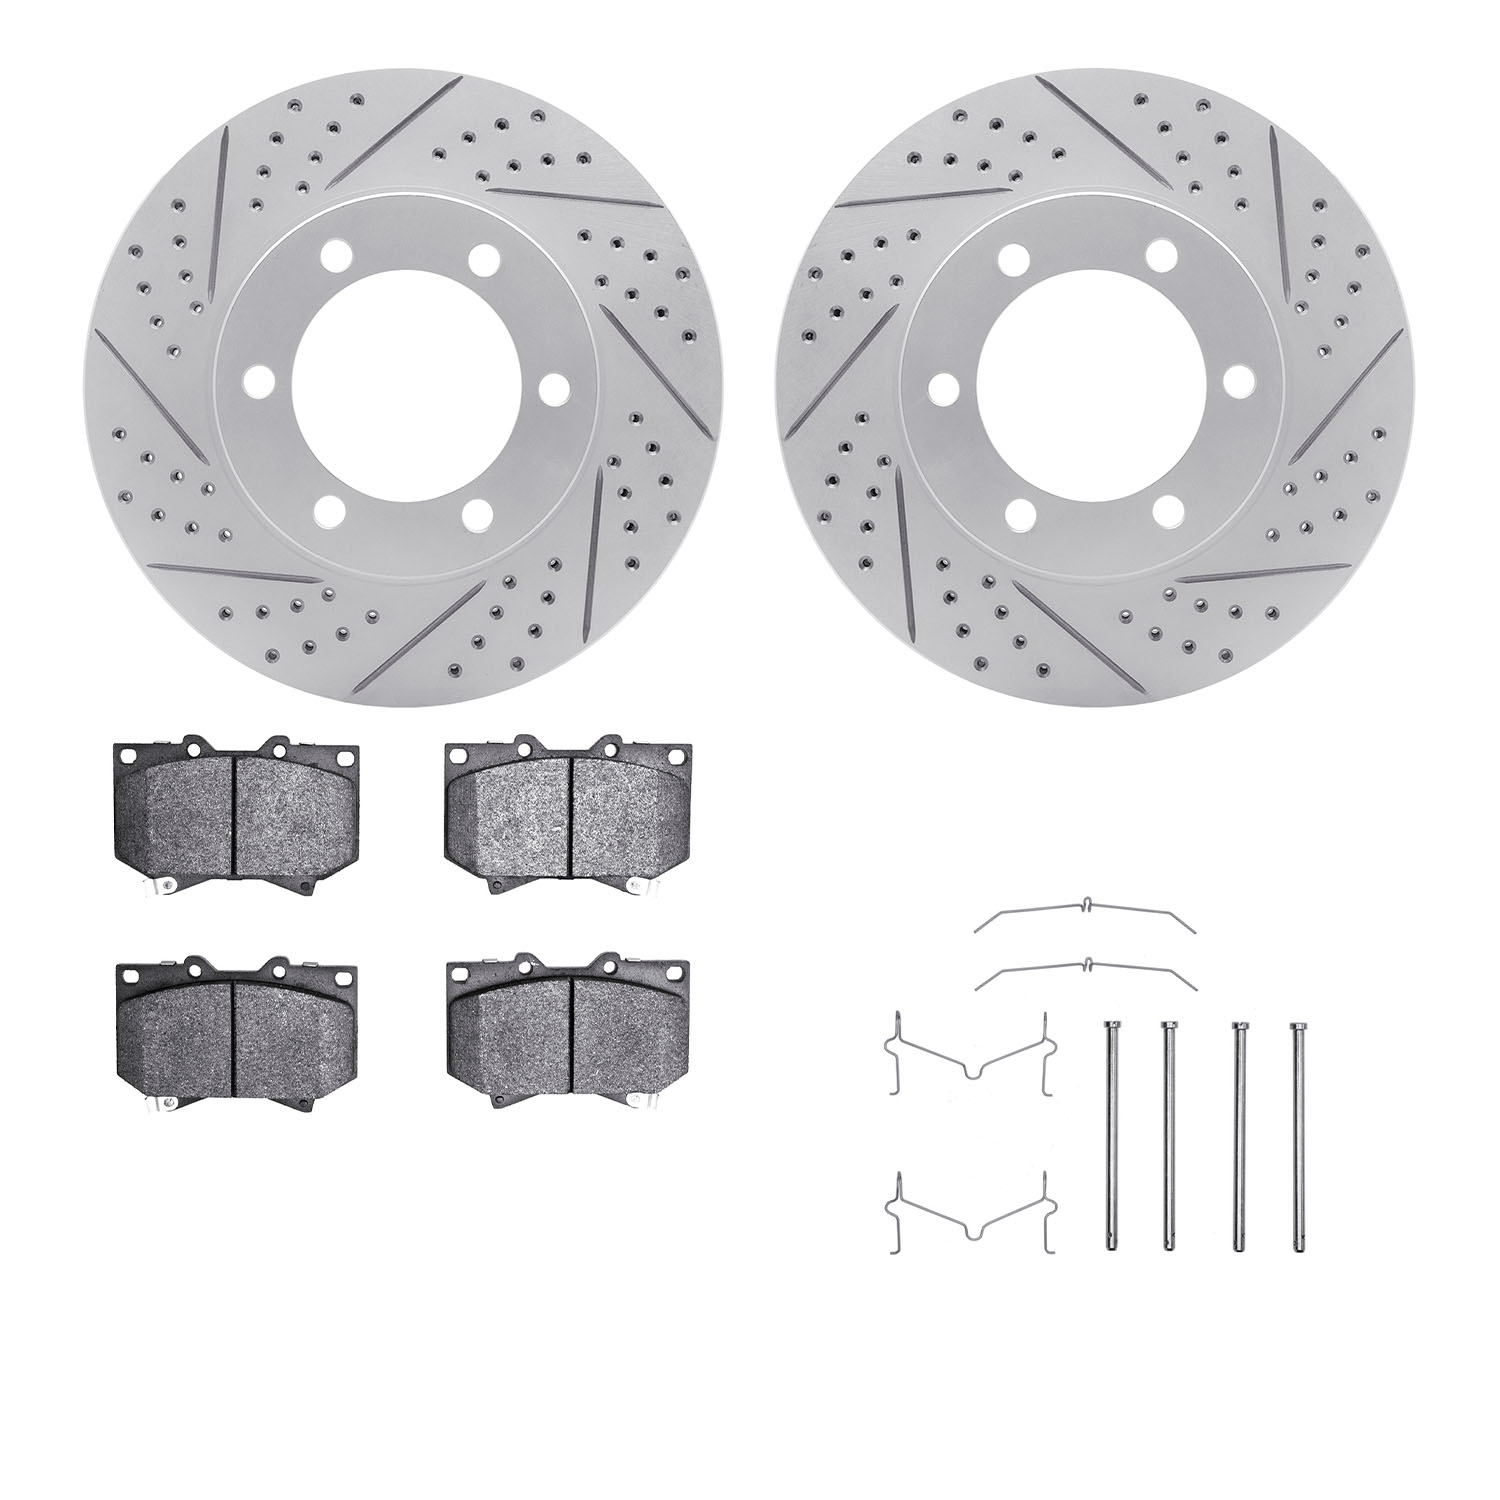 2212-76001 Geoperformance Drilled/Slotted Rotors w/Heavy-Duty Pads Kit & Hardware, 2000-2002 Lexus/Toyota/Scion, Position: Front